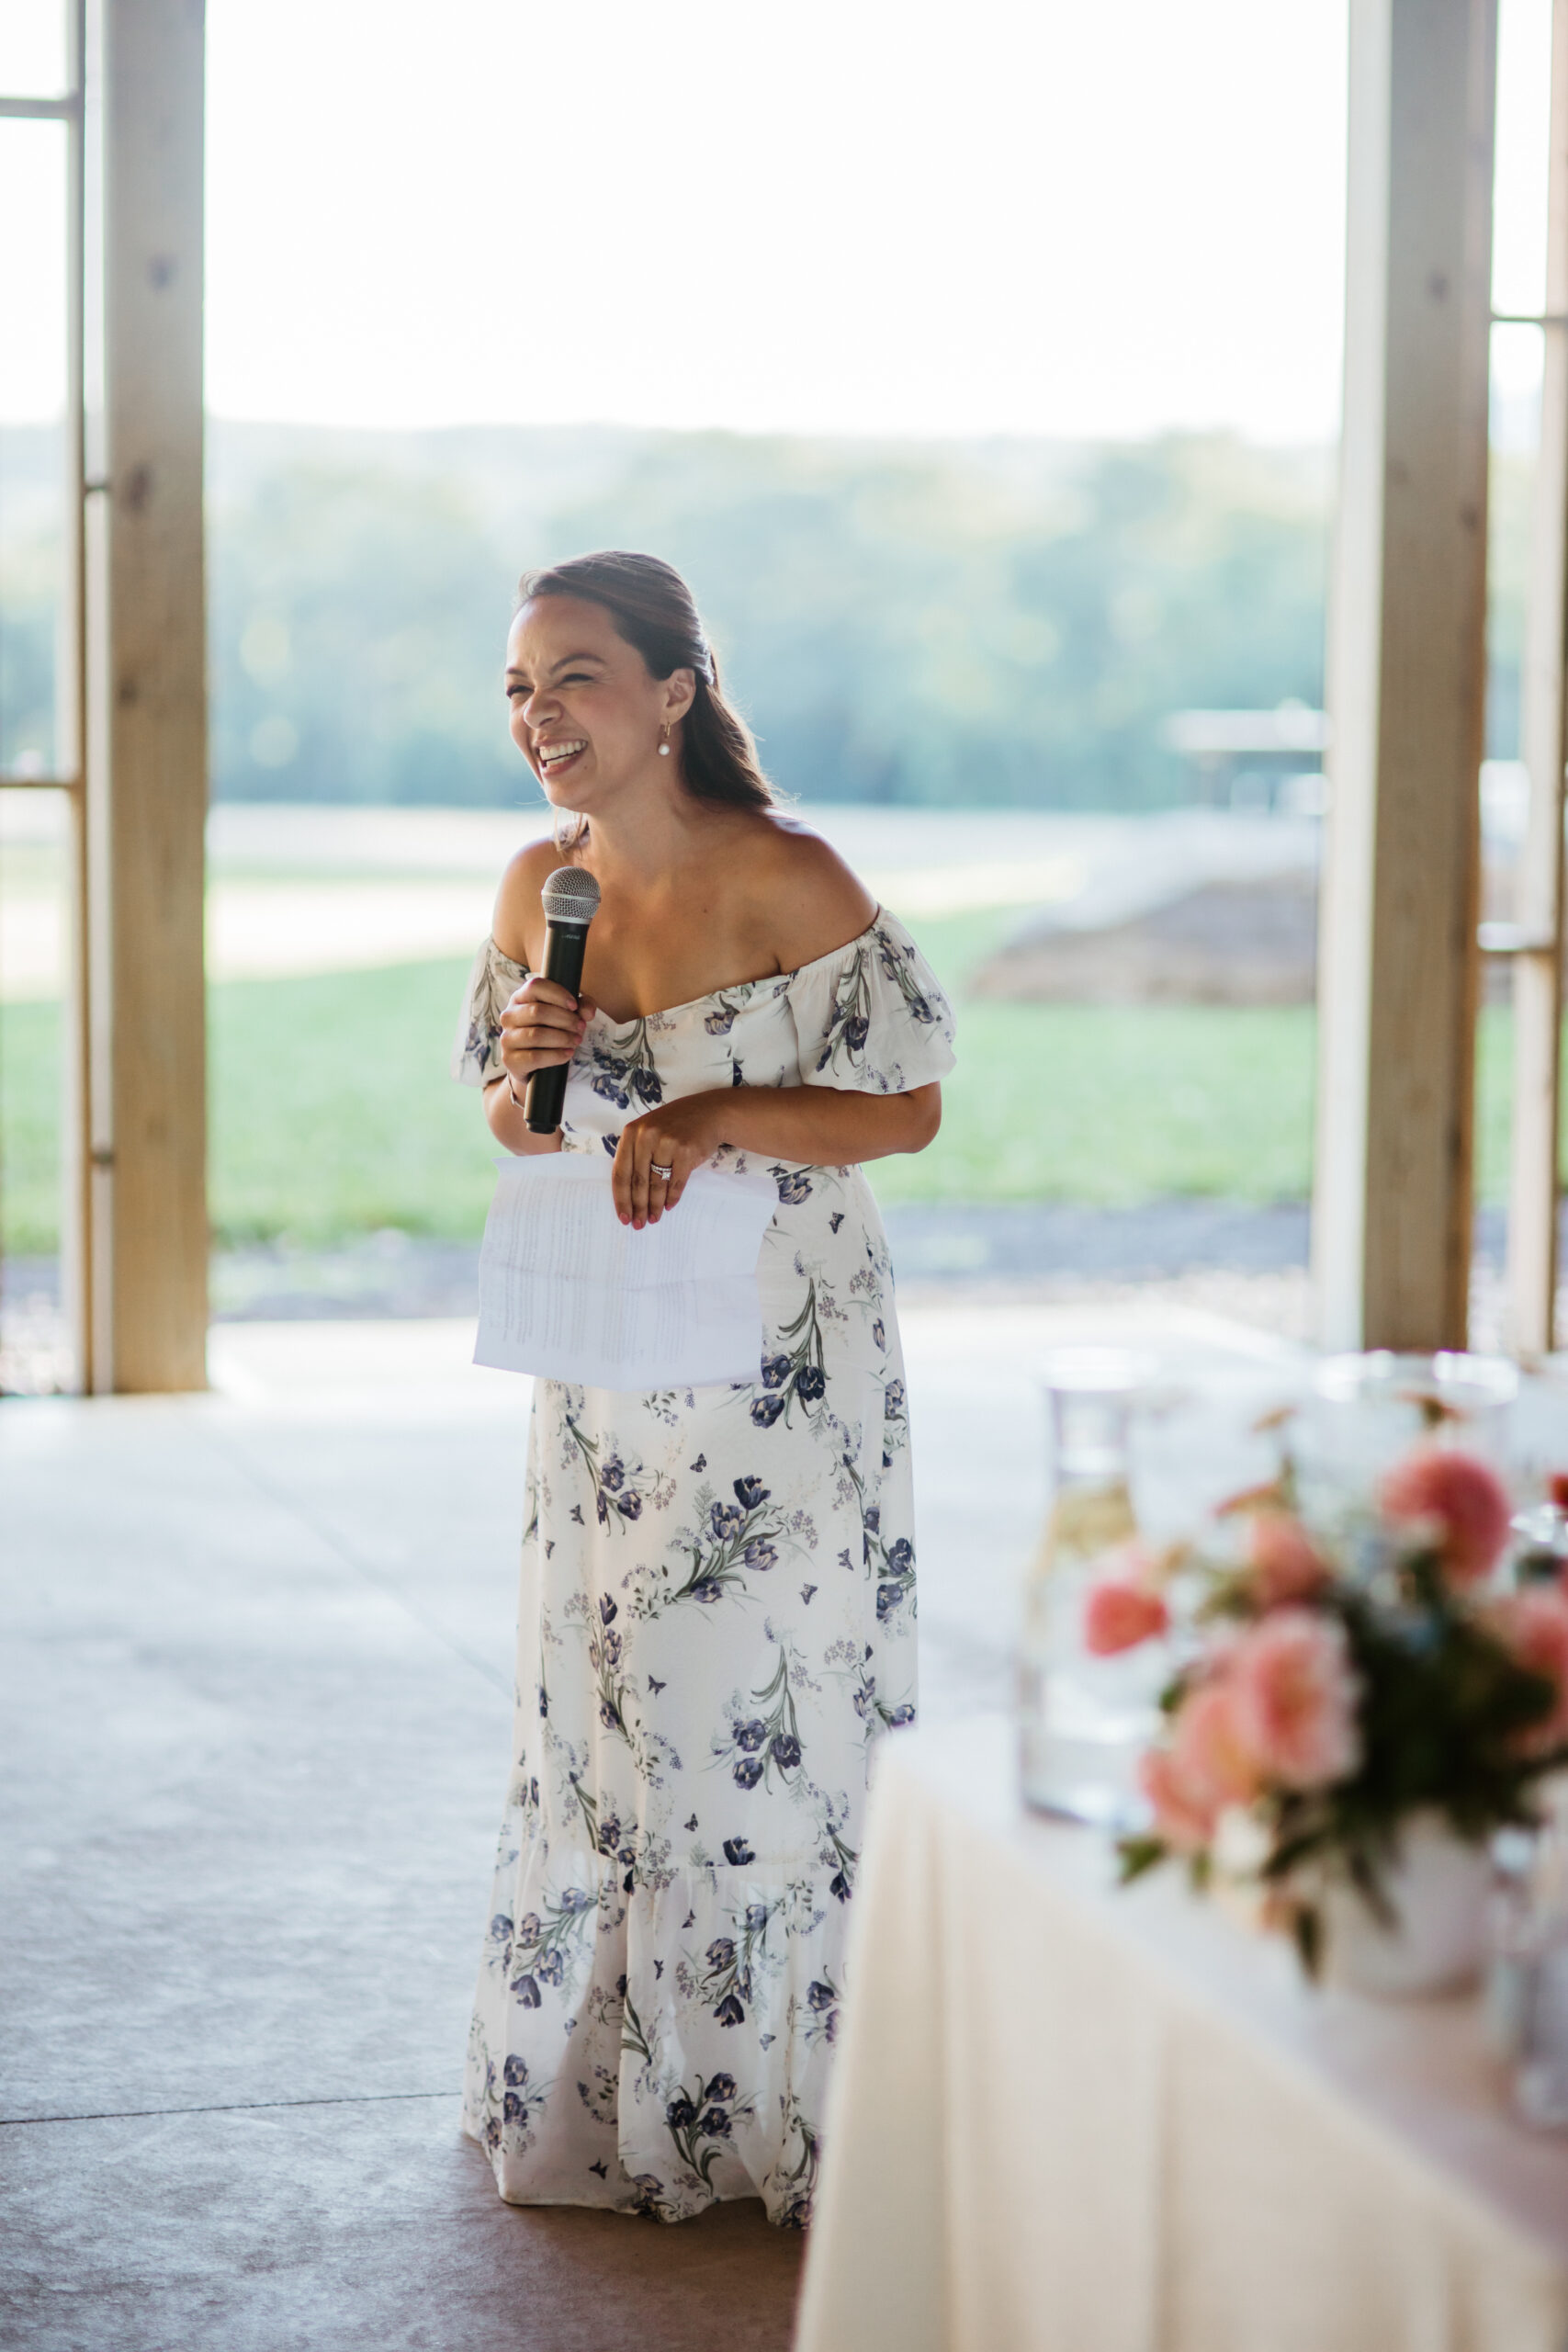 Stunning guest shares a toast on a dreamy Upstate New York wedding day